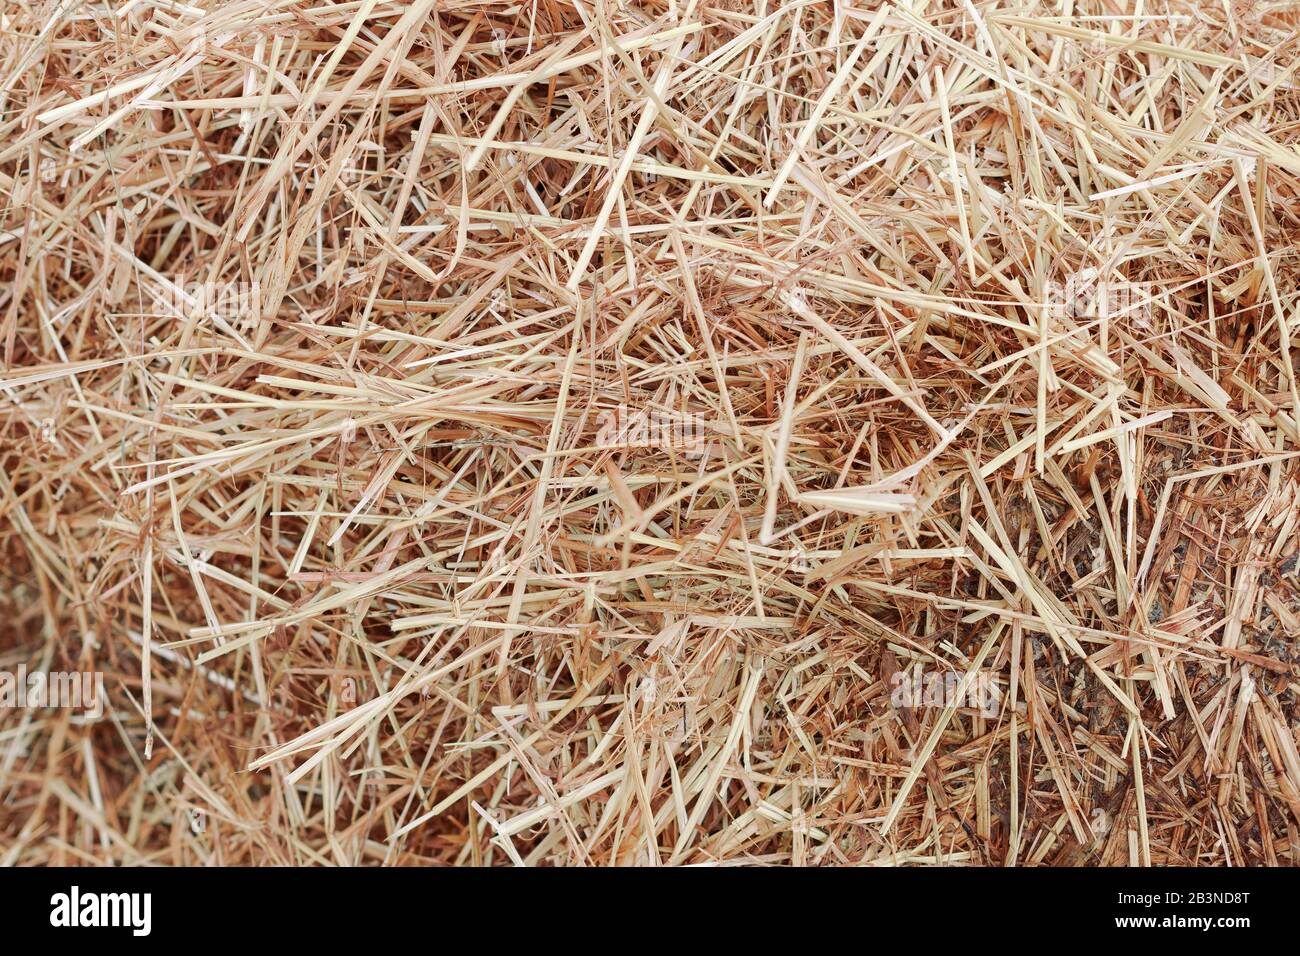 A Big Pile of Old Yellow Hay Straws on the Ground Hay. Hay Bails. Seamless  Texture Hay, Straw. Hay Background. Straw Stock Photo - Image of natural,  harvest: 208830216